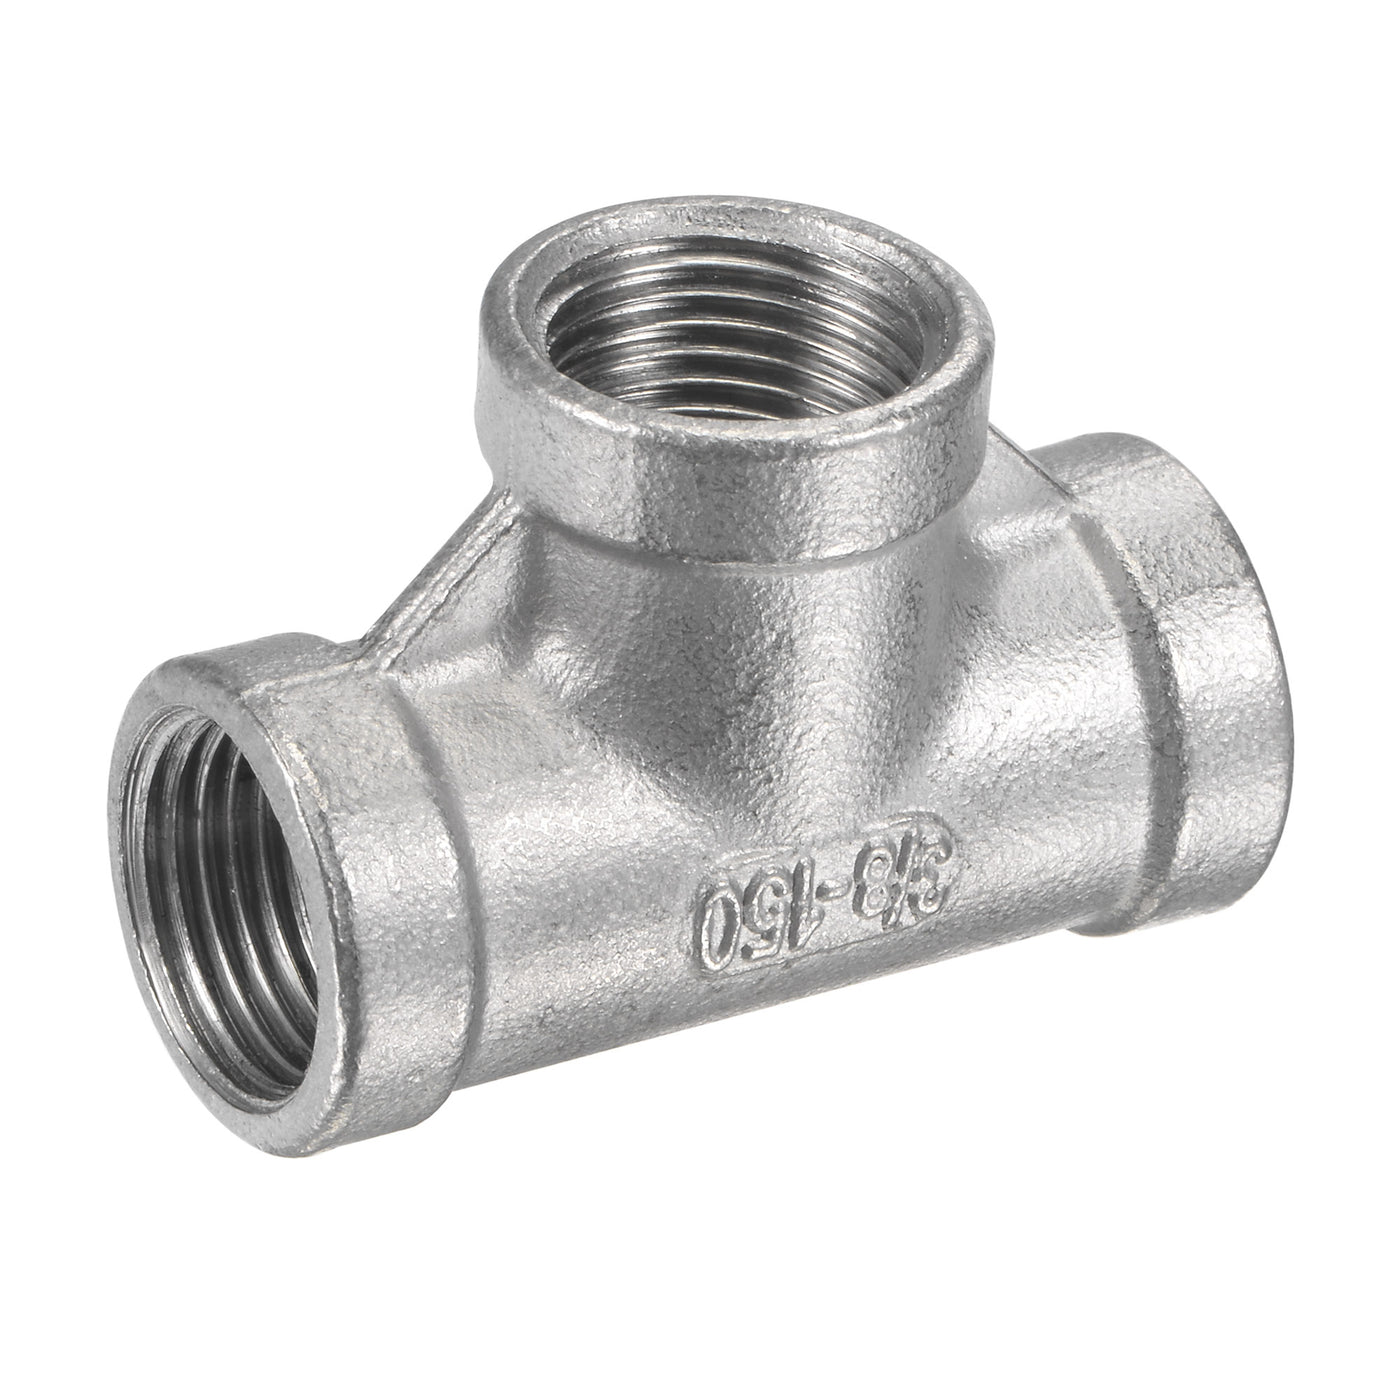 uxcell Uxcell Pipe Fitting Tee NPT Female Thread Hose Connector Adapter 304 Stainless Steel